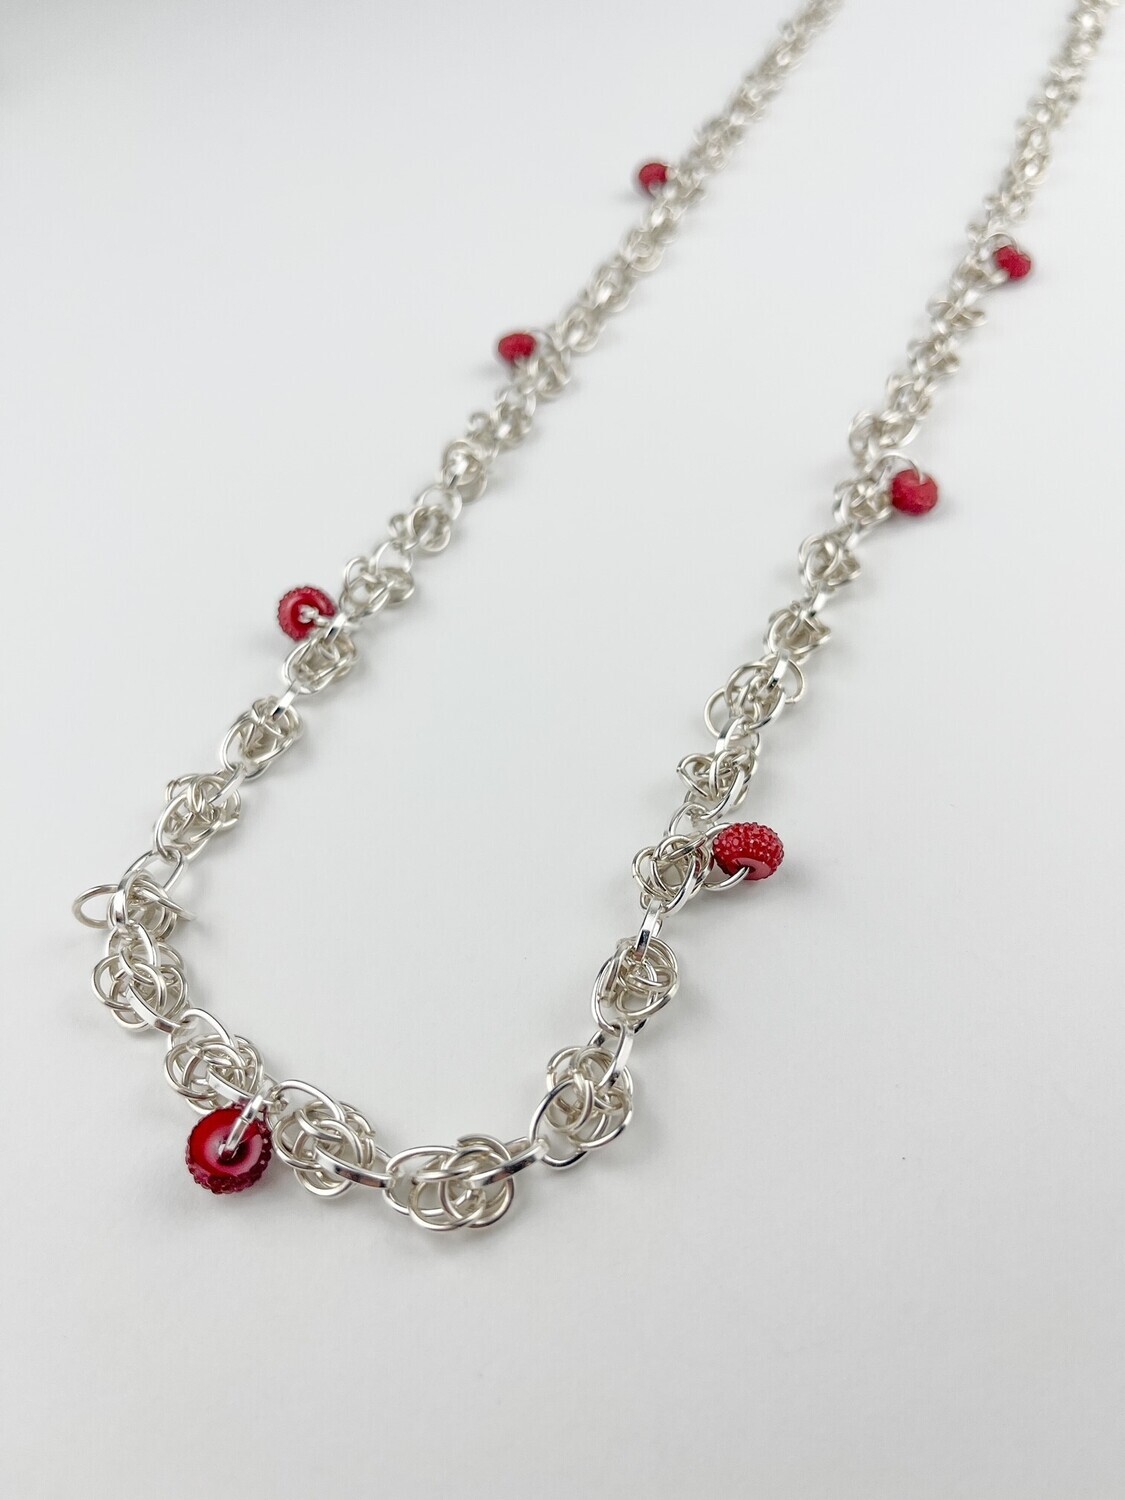 Pendant with Red Glass Beads Handmade Chain 32"